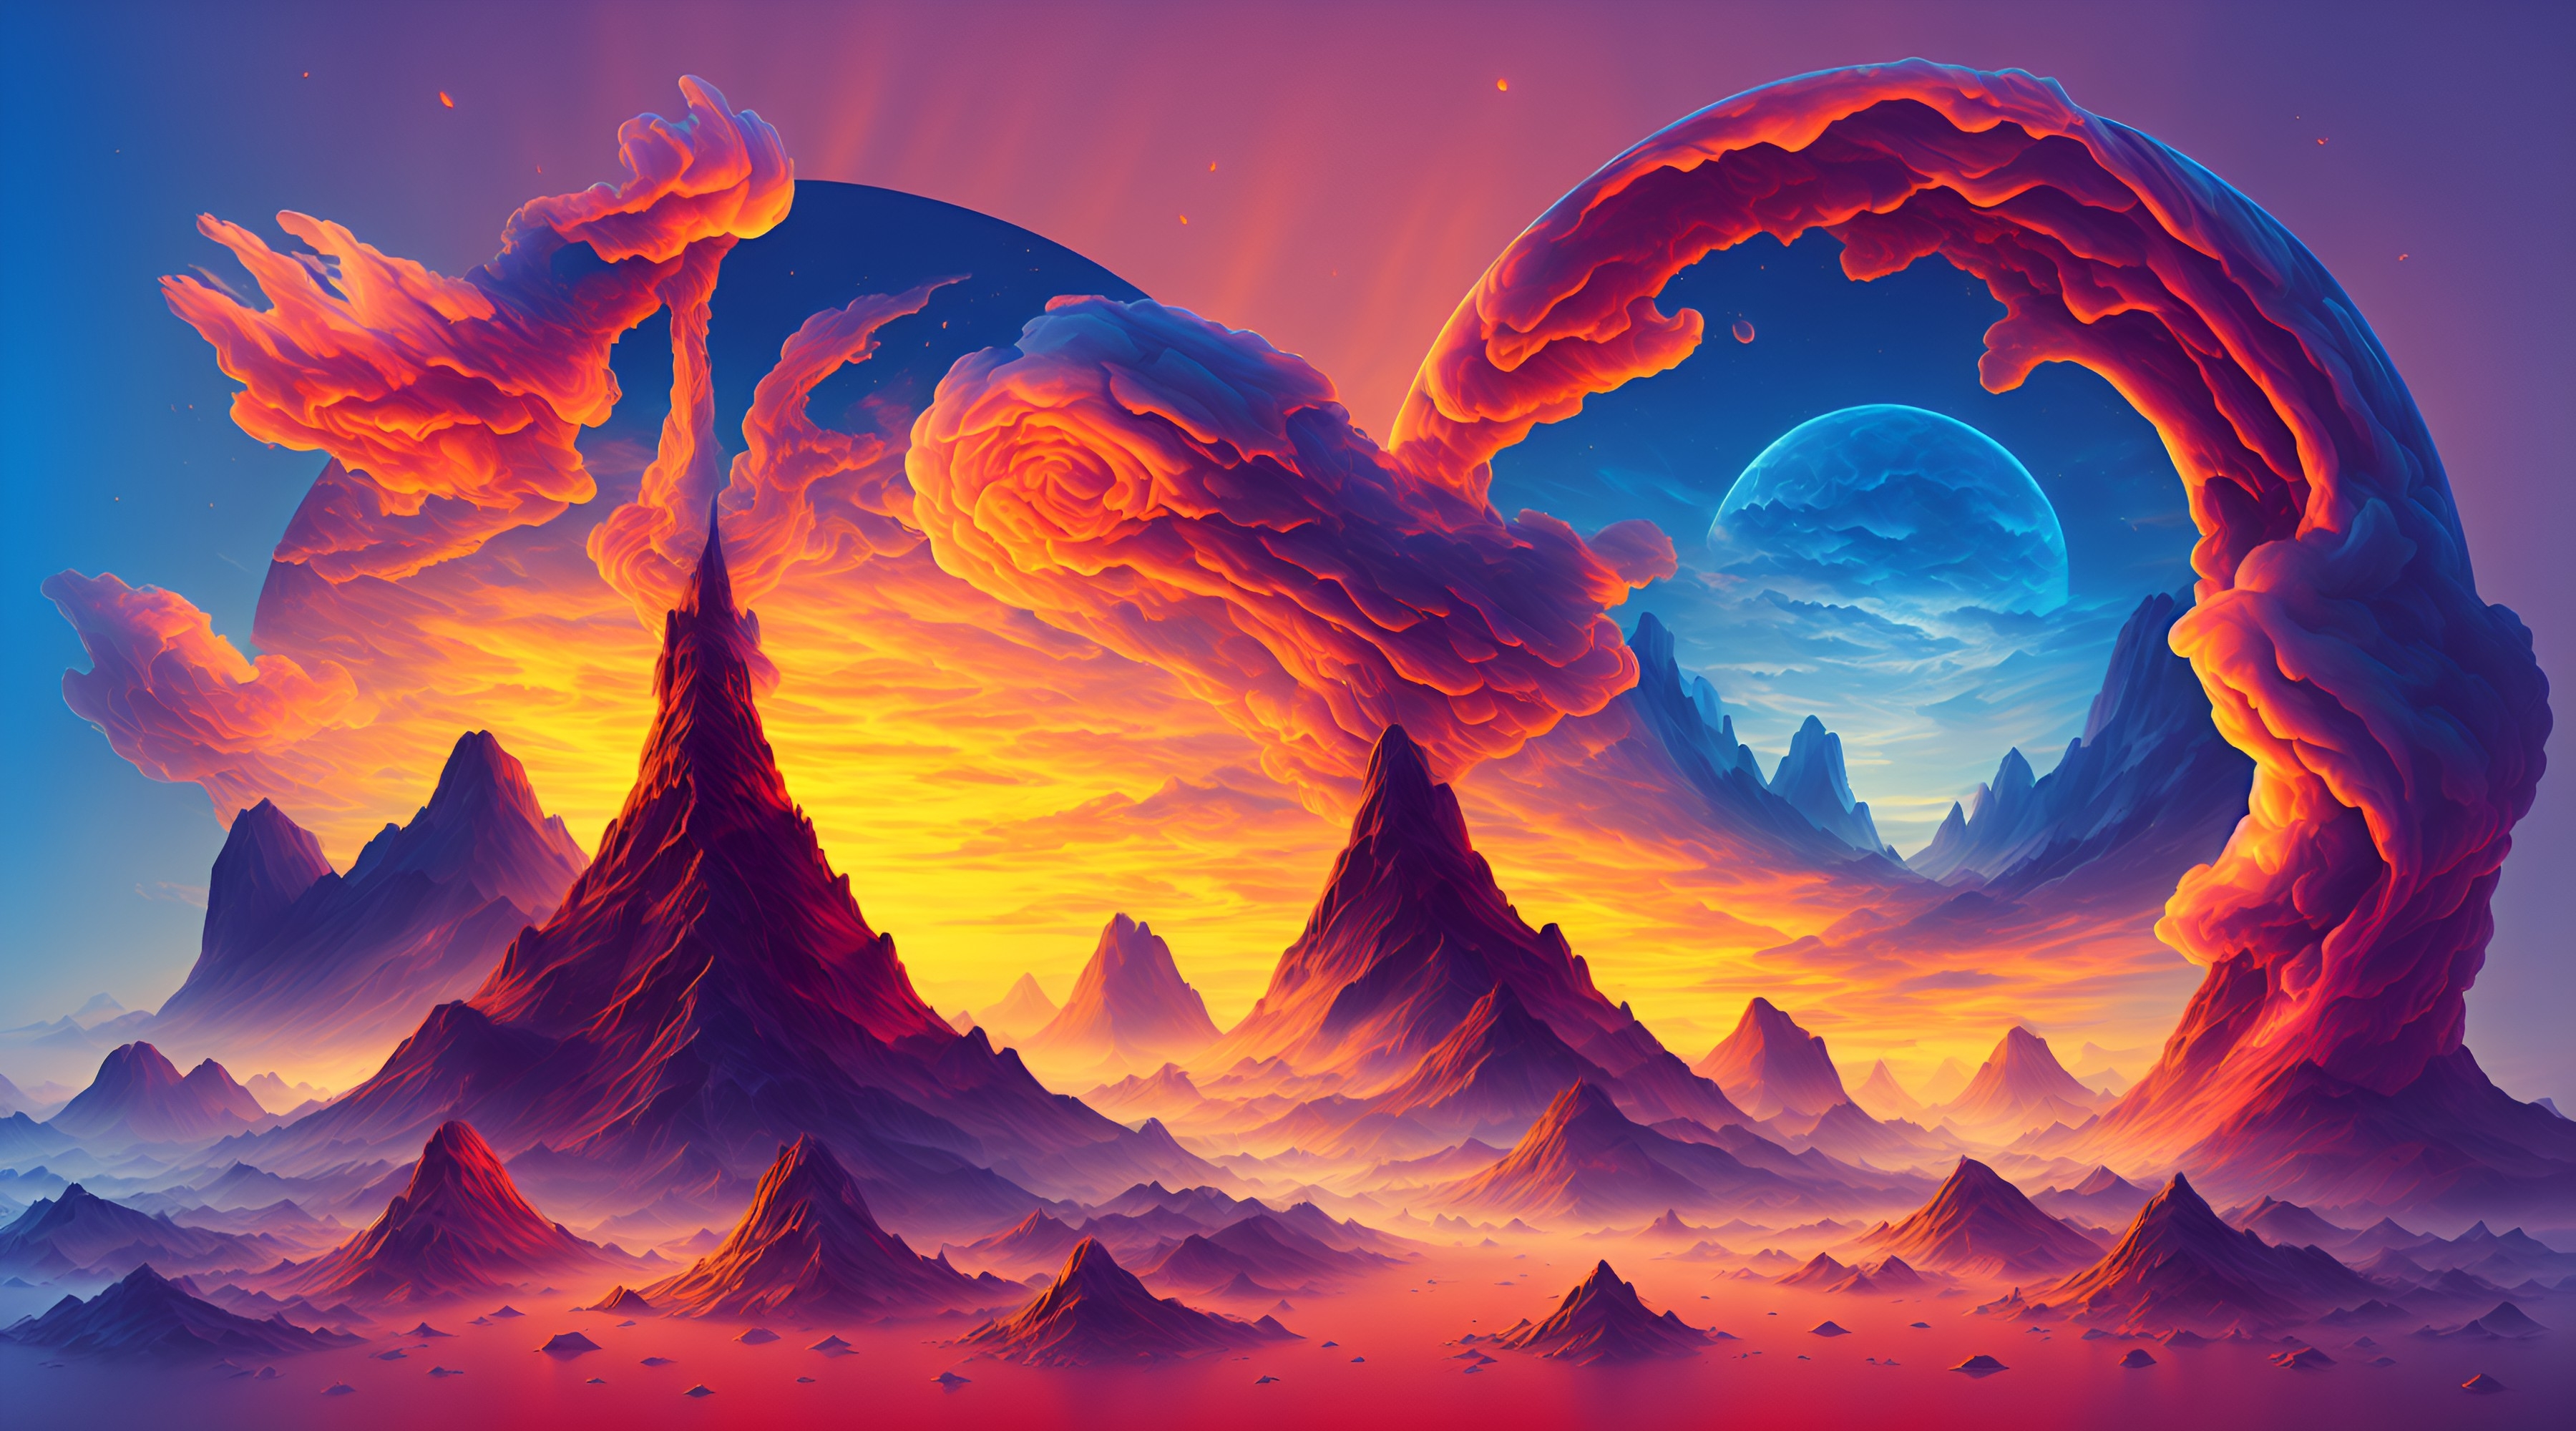 Download Imaginary Wallpapers from Google Chromebook [8K Resolution]